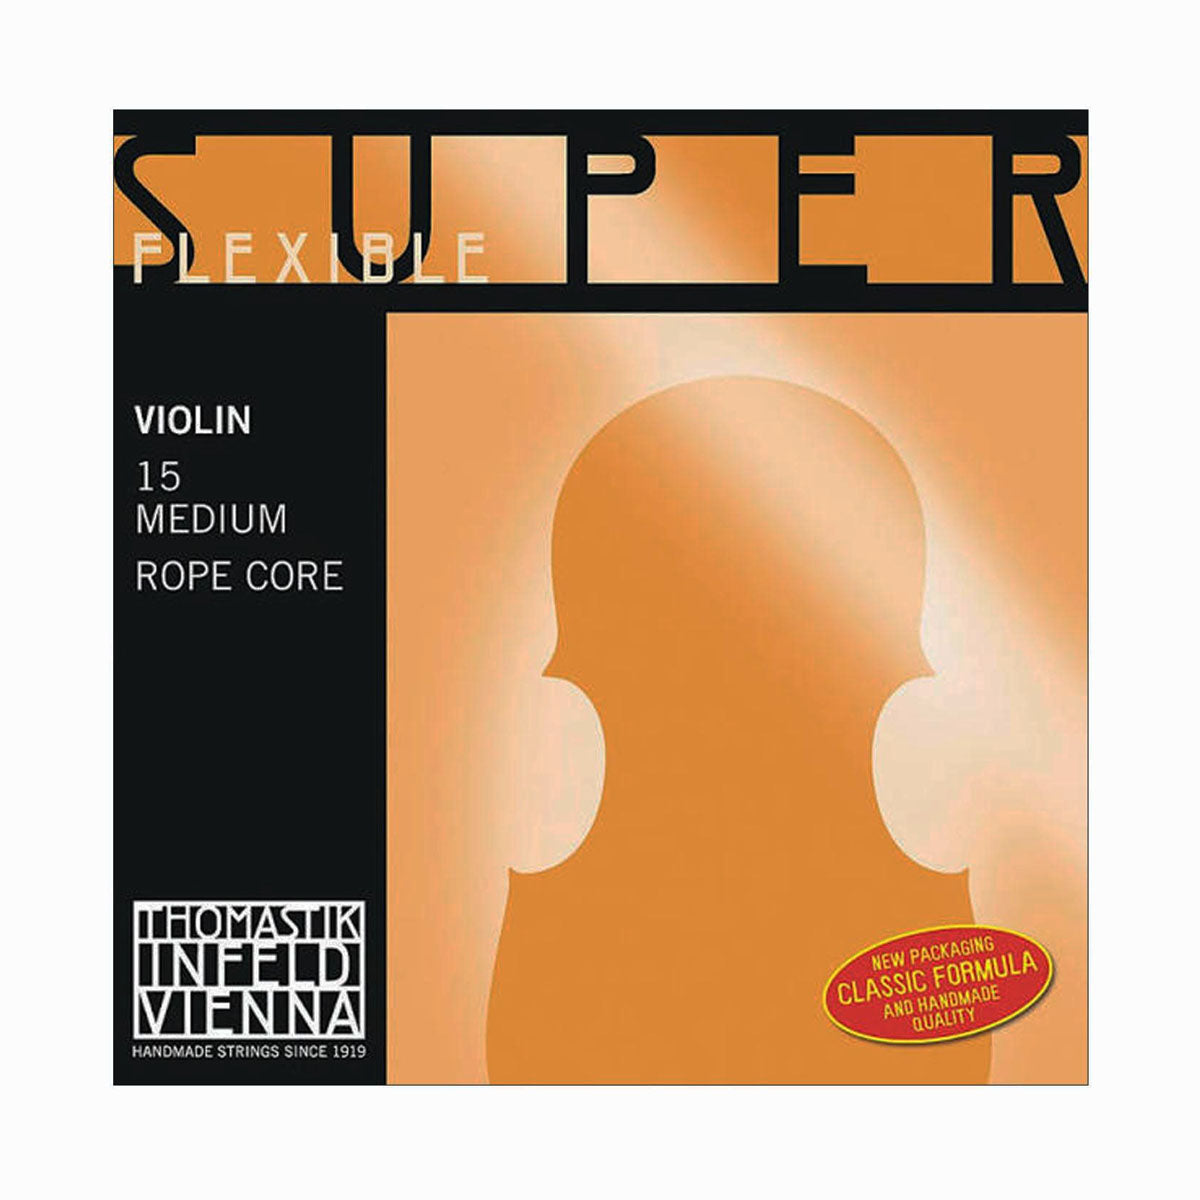 Superflexible Violin string, Thomastik Infeld, Austria, full size, 4/4, 3/4, 1/2, 1/4, 1/8, 1/16, hand-picked and inspected by Violins and such, with TEO musical Instruments, London Ontario Canada